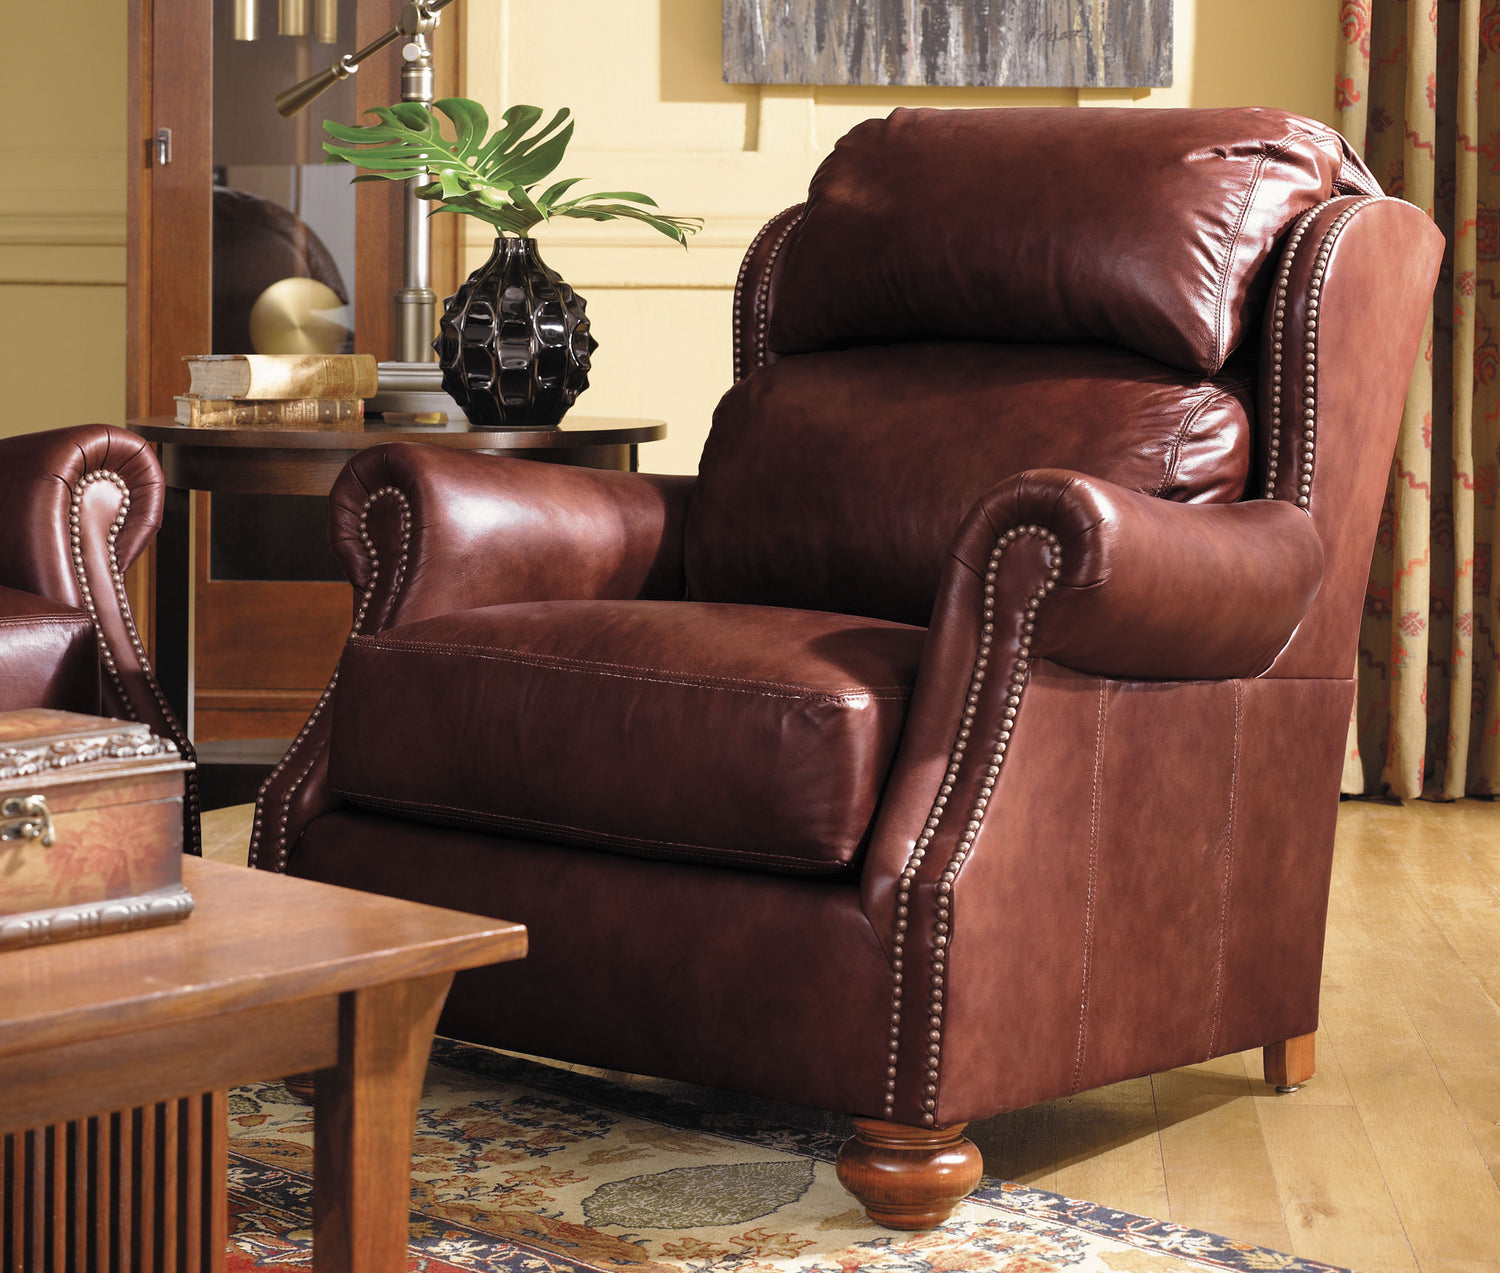 Lifestyle of a brown leather Durango Recliner that has a wooden end table next to it with a small black vase on top, and the corner of a Park Slope coffee table is shown in the bottom left corner